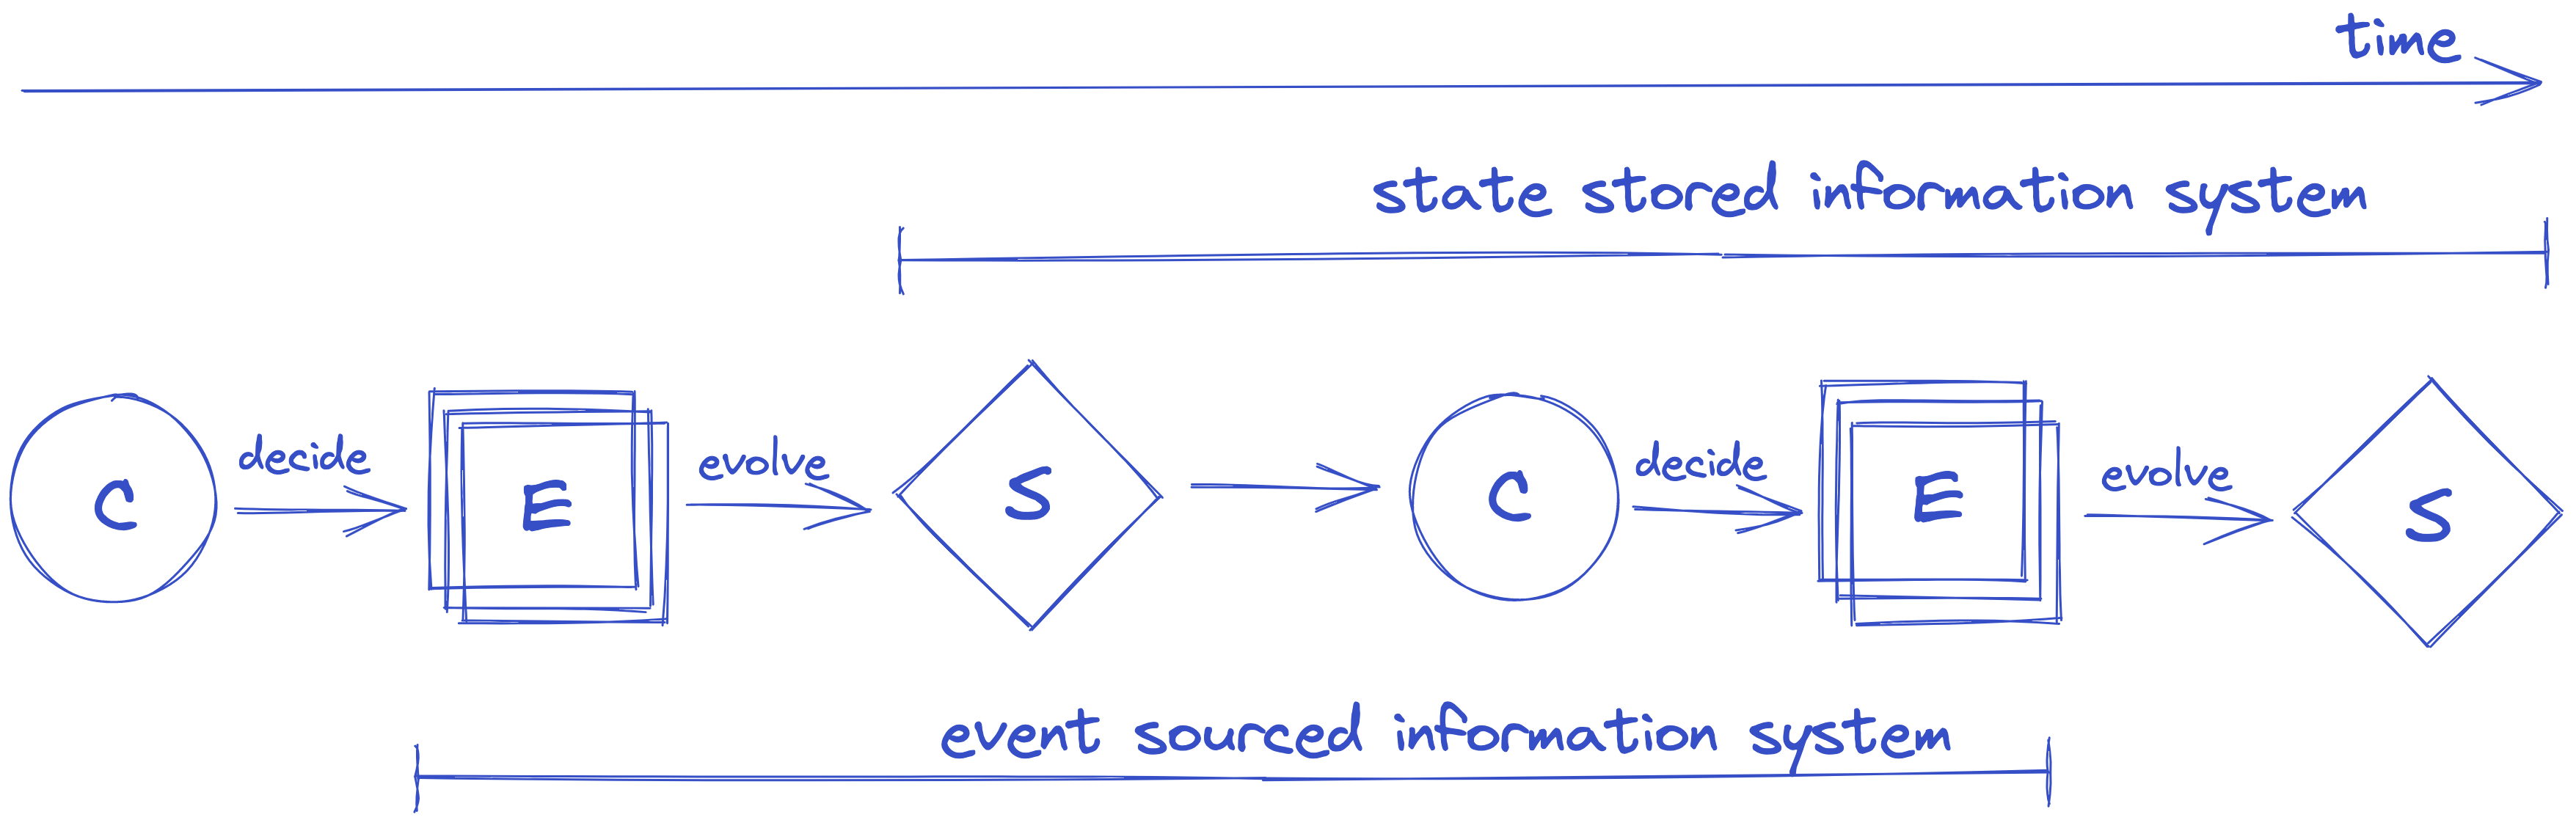 event sourced vs state stored